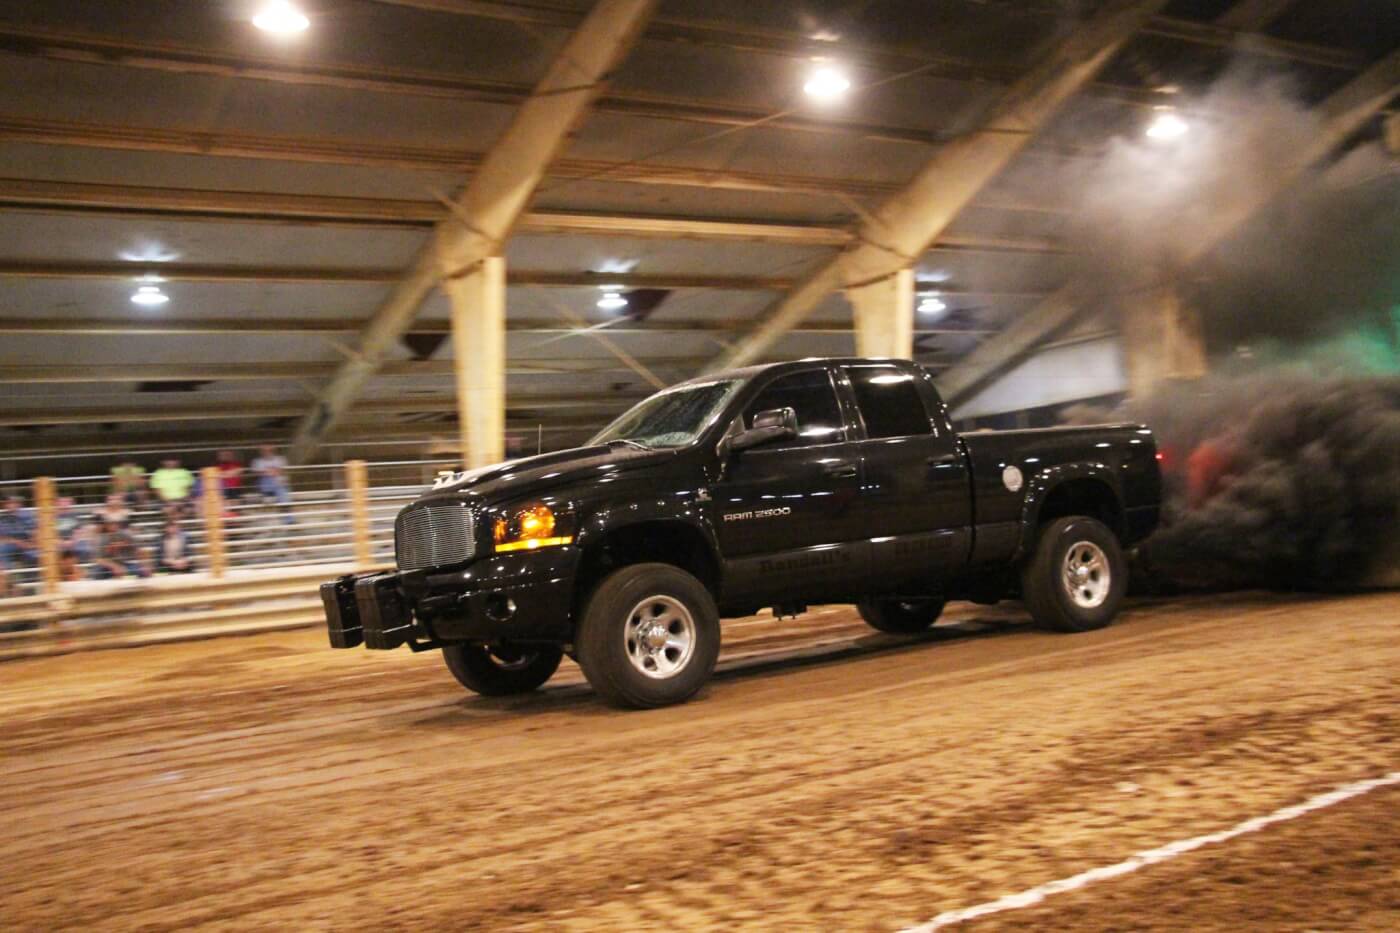 With some serious mph built up by mid-track, Brian Randall led the field in the Hot Street class with a 344-foot pull. His ’06 Dodge sports three turbos, two 12mm CP3’s, 250 percent over injectors, and is driven on the street. It’s a textbook example of what the Hot Street class is all about: a class that provides high horsepower, street-legal, unlimited turbo trucks a category to compete in.